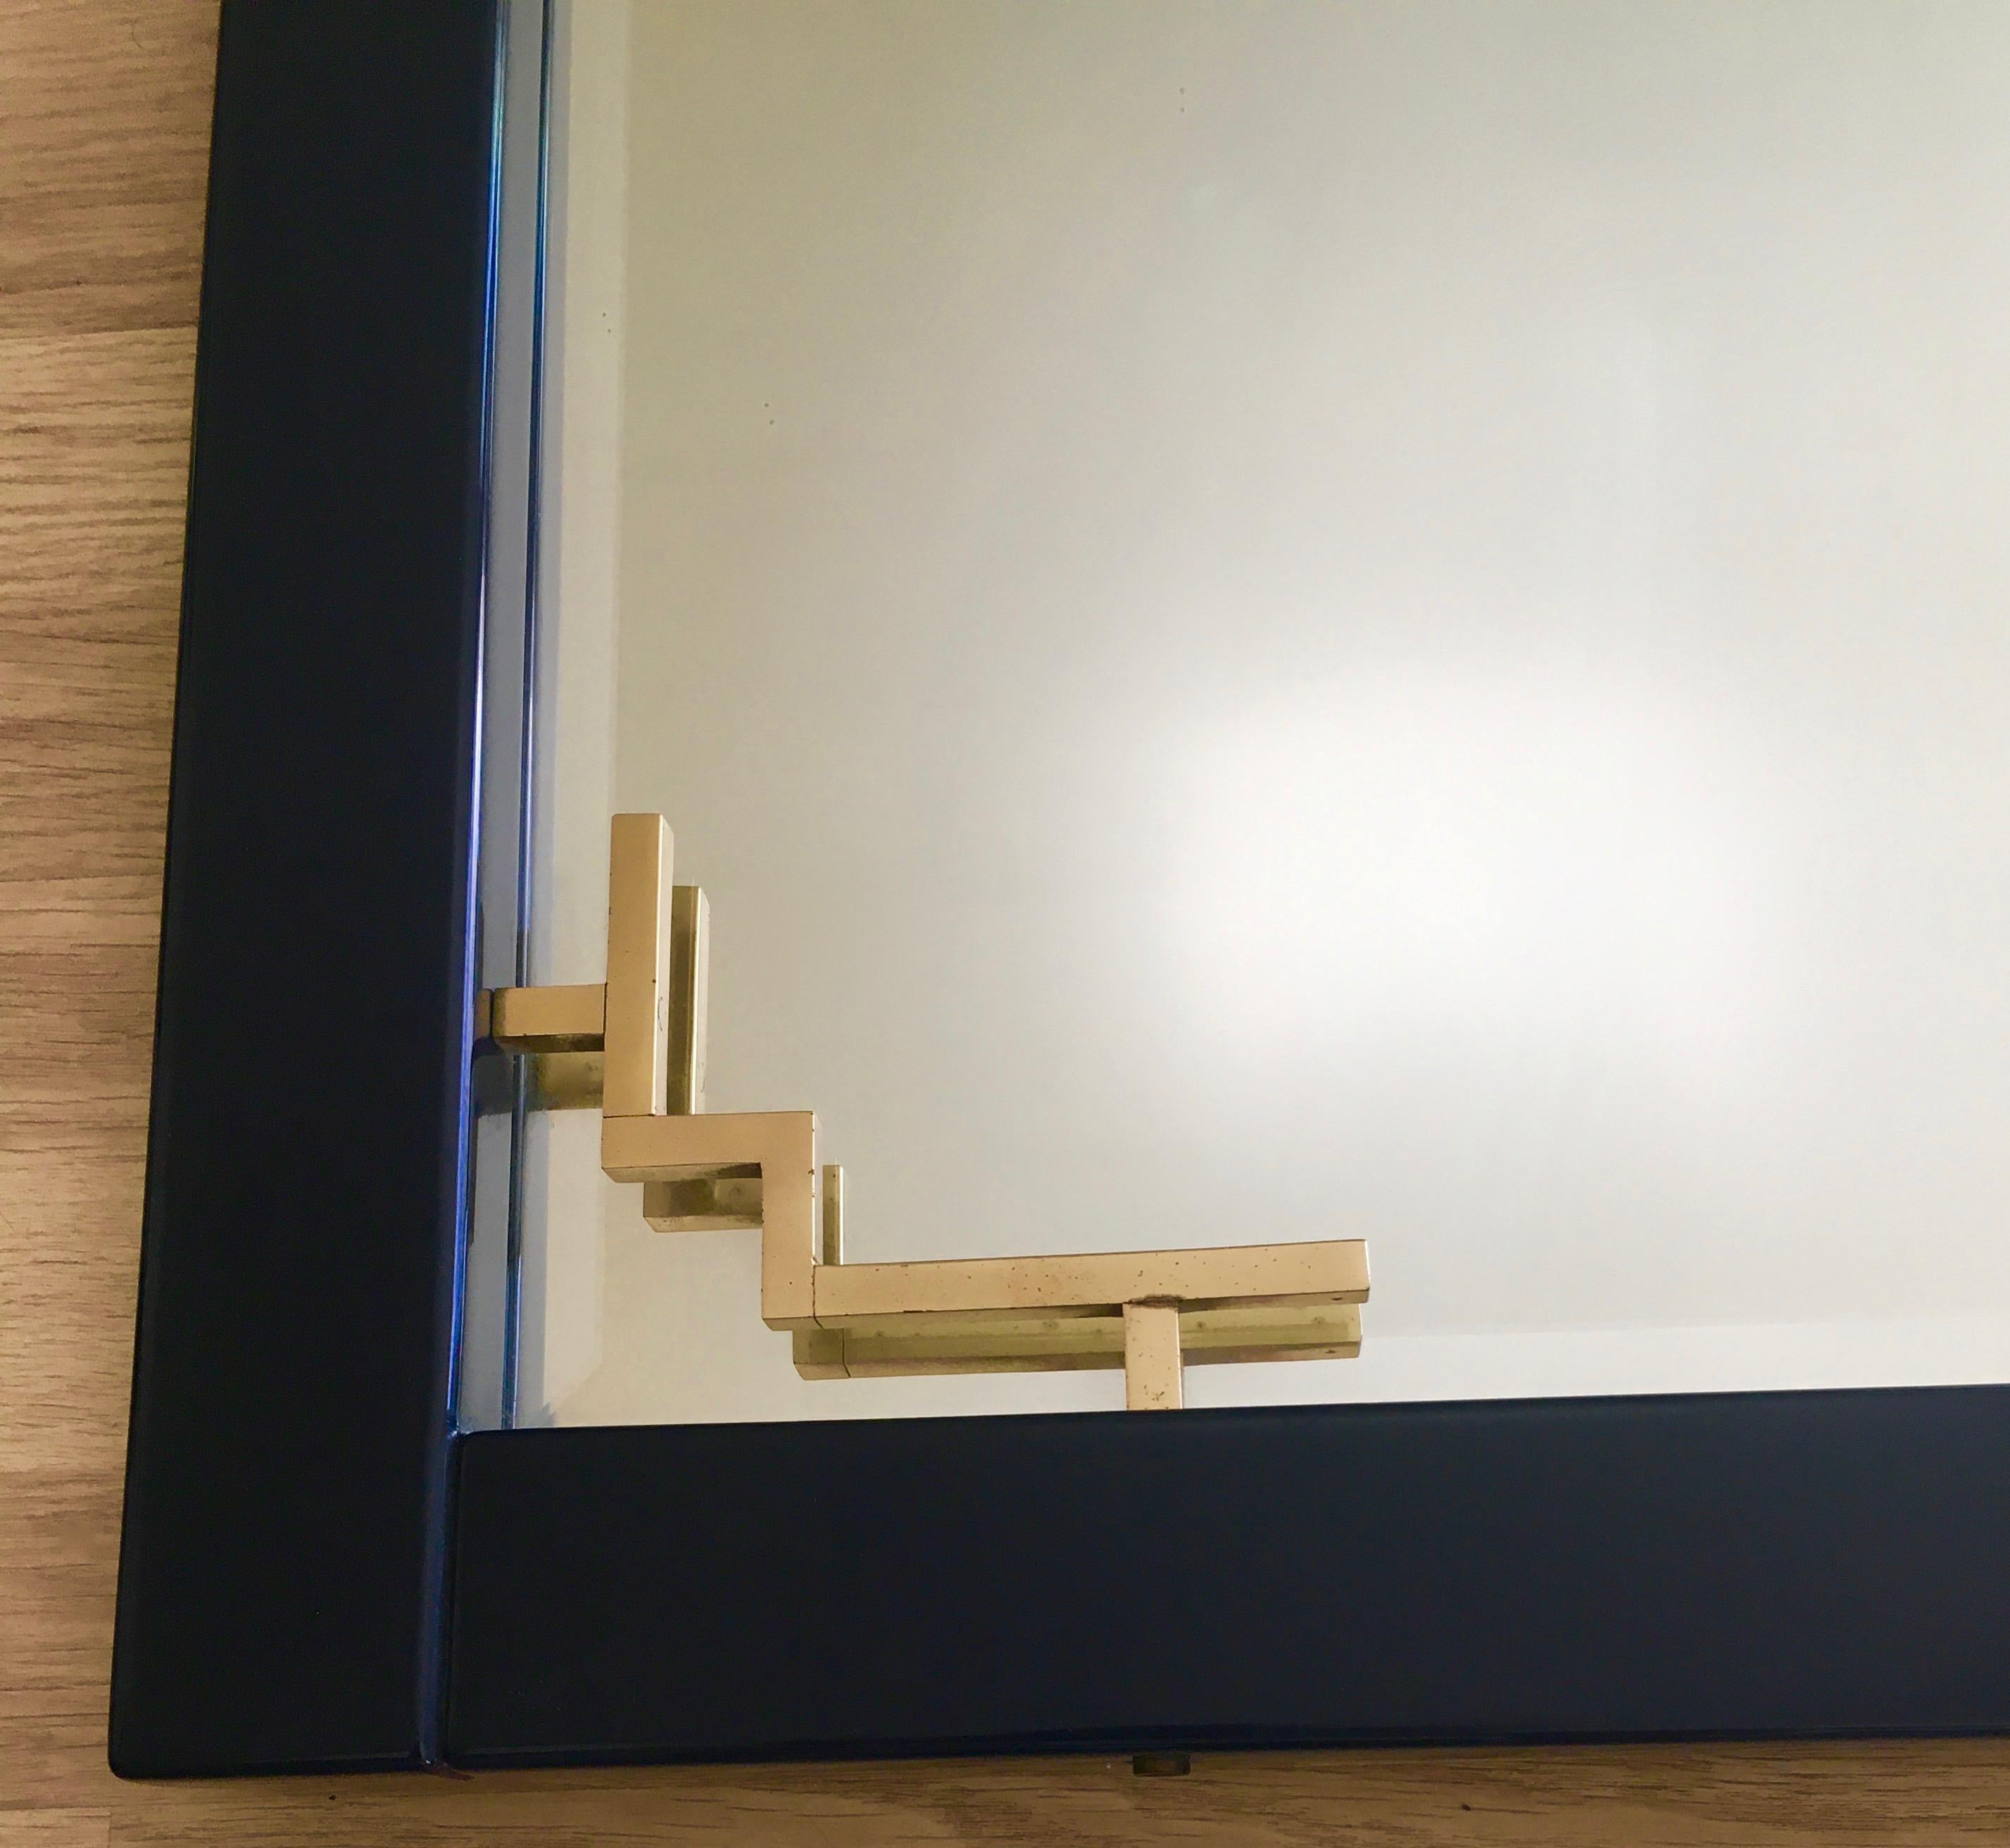 Lacquered Large Blue Lacquer Mirror with Brass Details by Maison Jansen, France, 1978